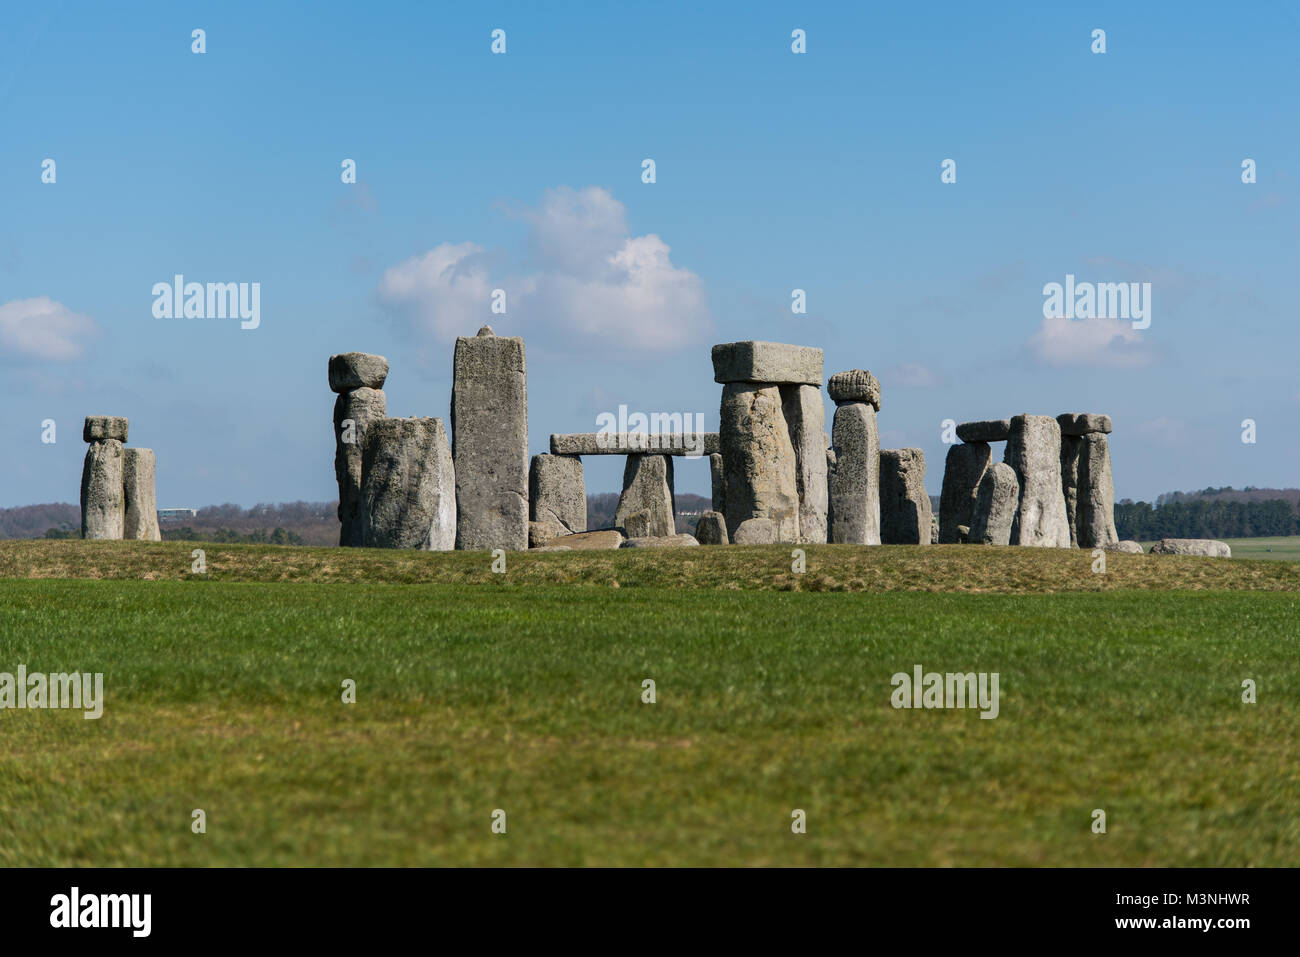 Stonehenge, Wiltshire - view across grass fields of the stone circles on a quiet day with no visitors Stock Photo